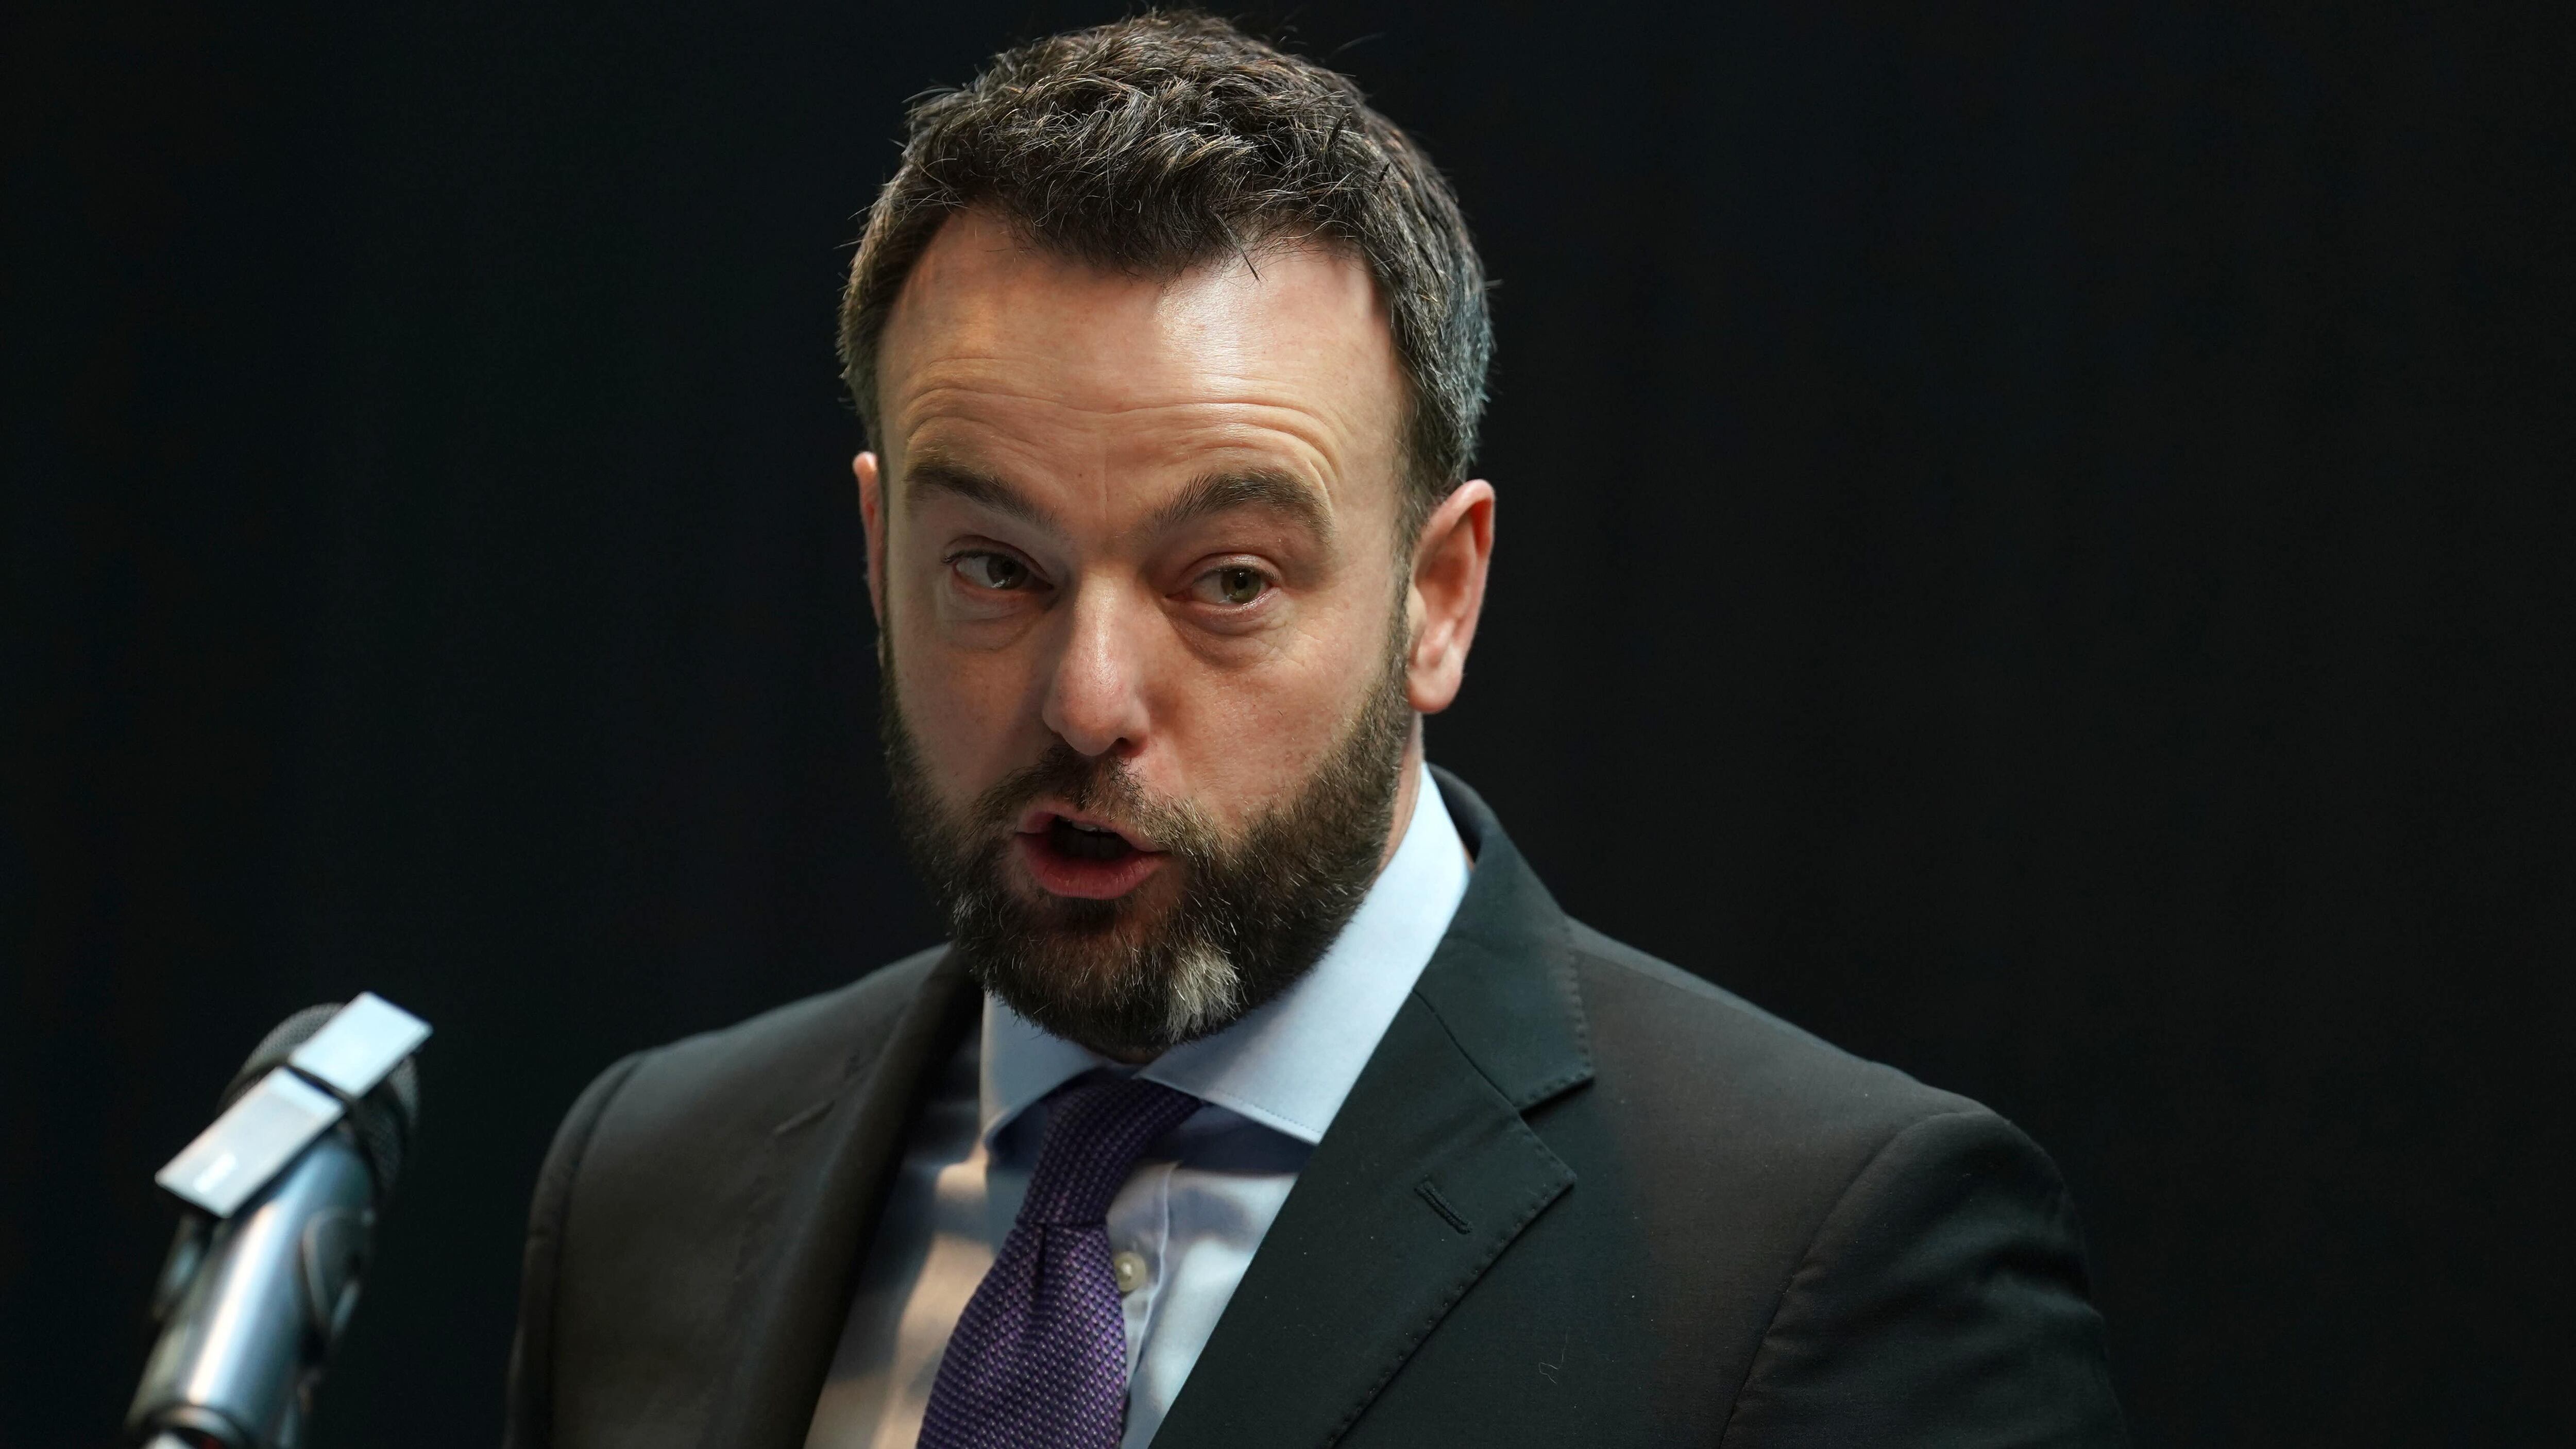 SDLP leader Colum Eastwood has welcomed a review of rail services in Ireland and Northern Ireland (Brian Lawless/PA)